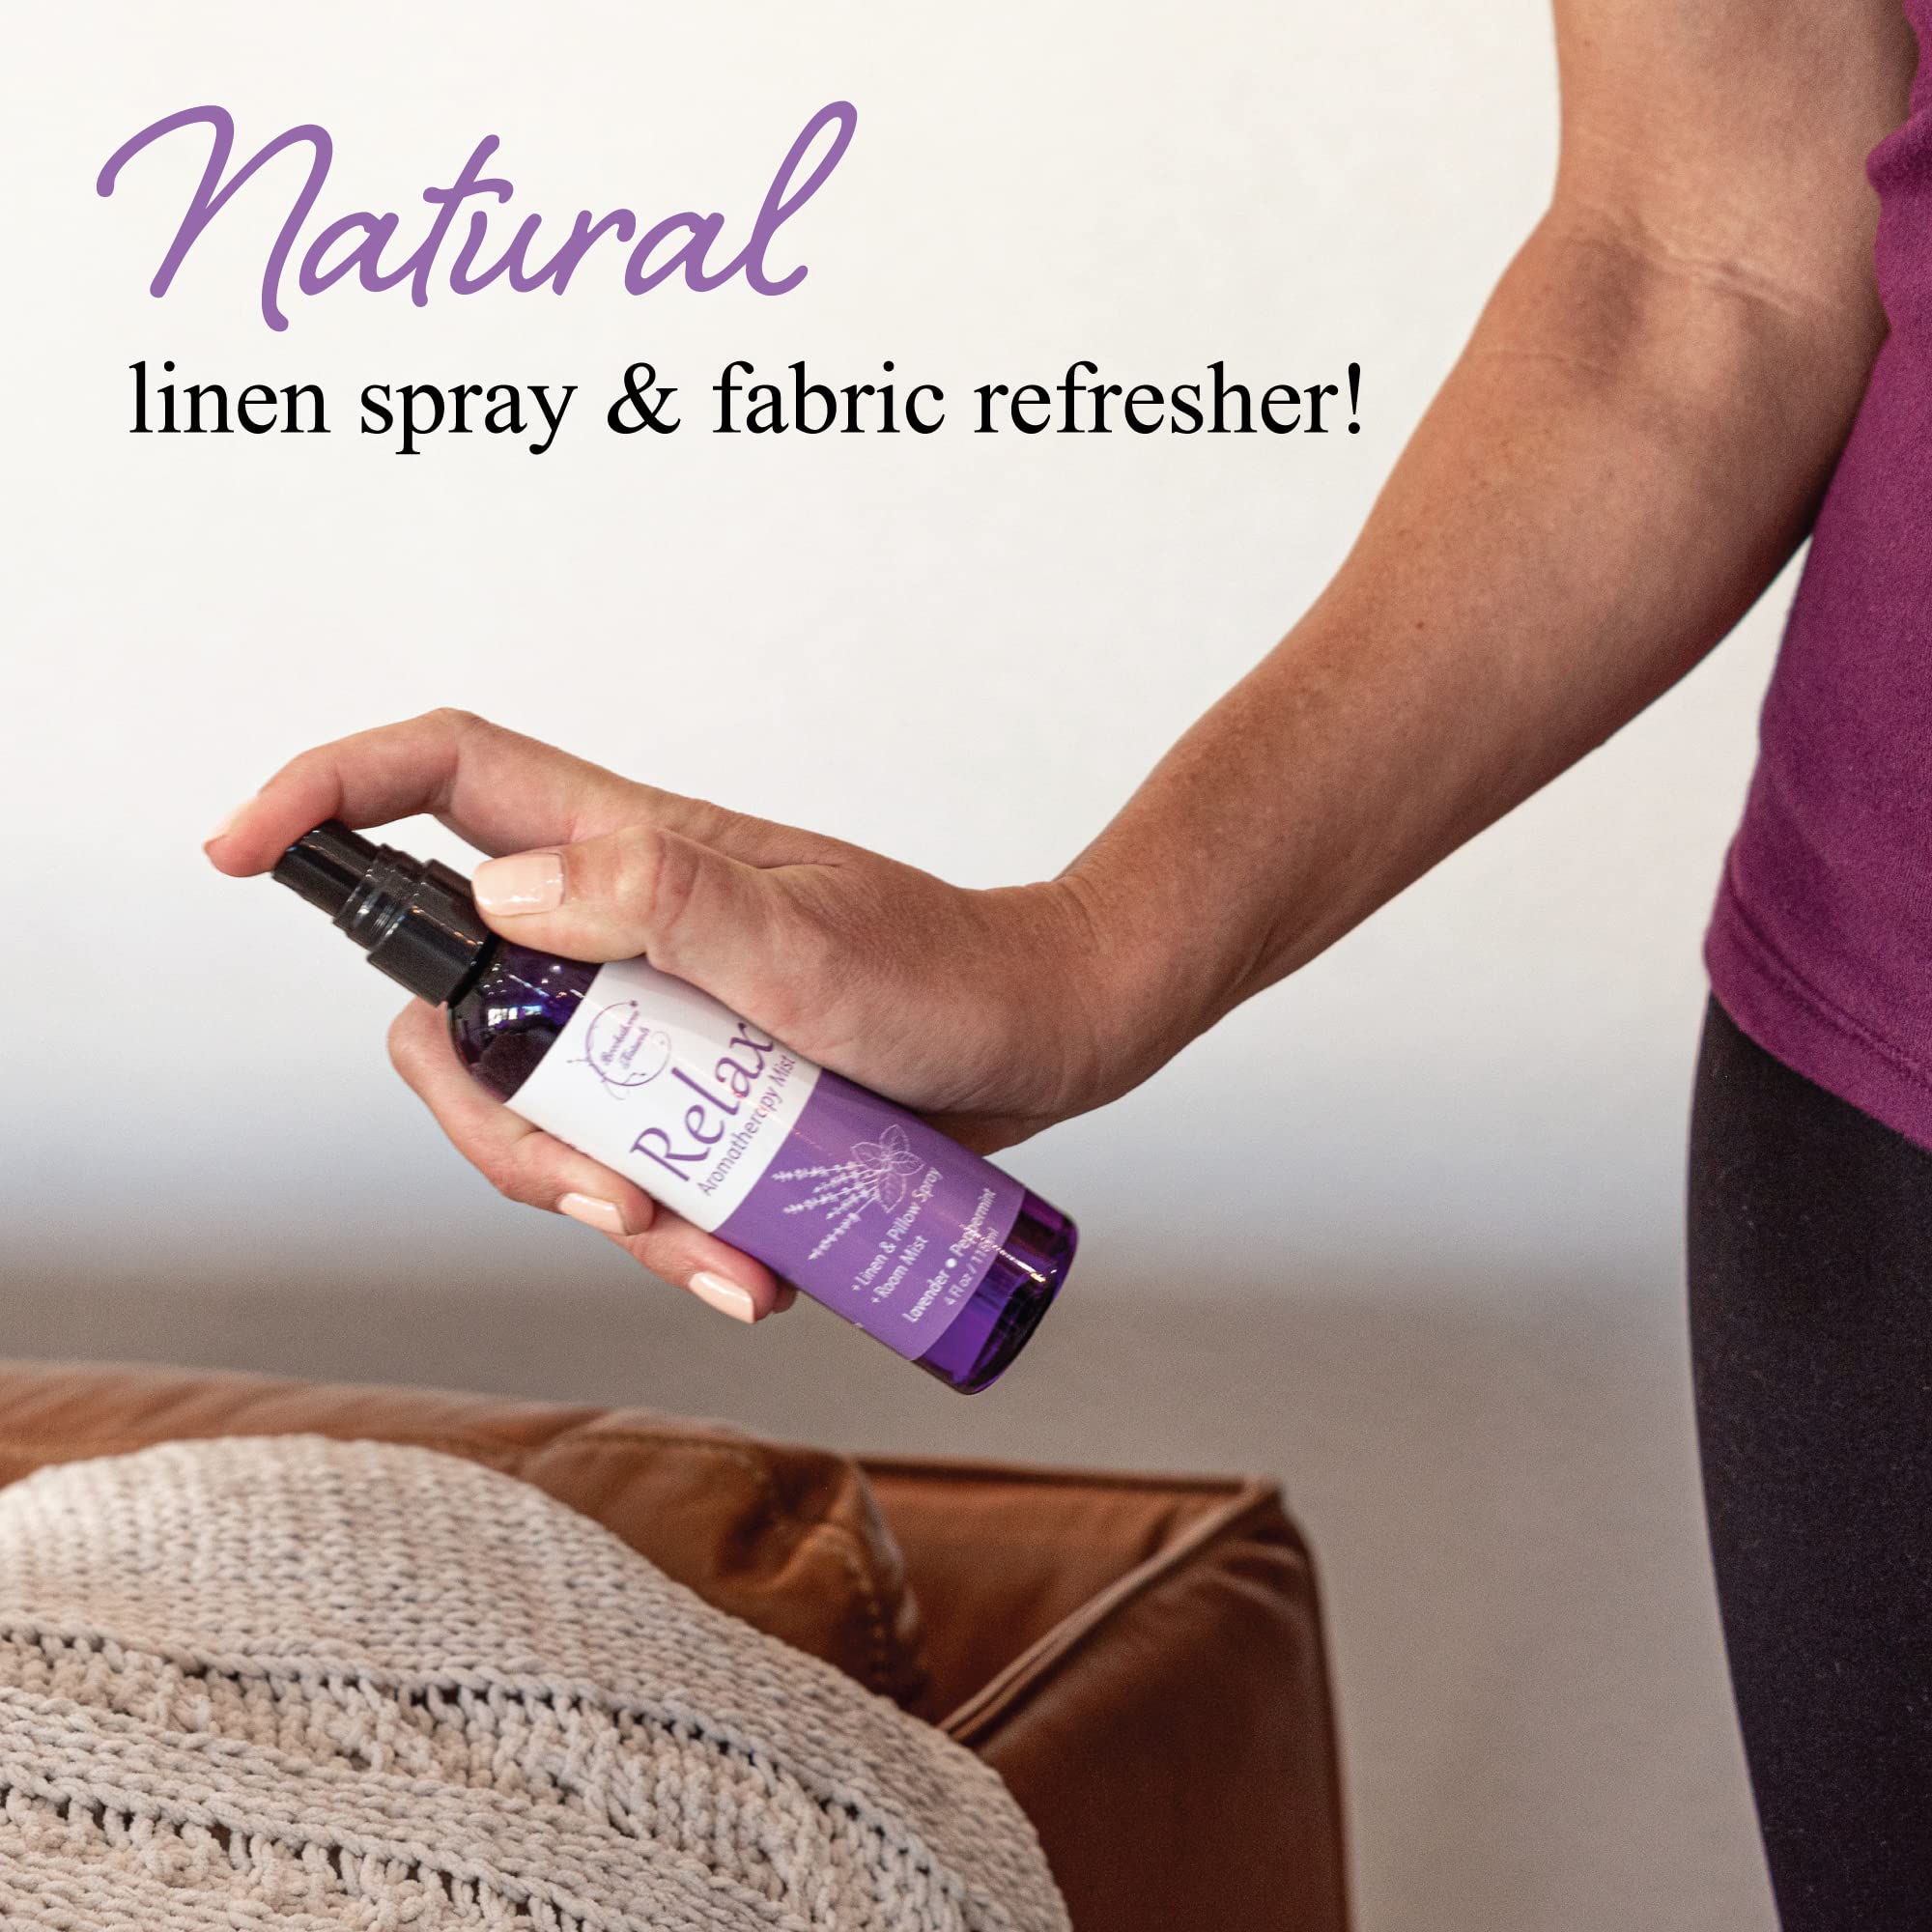 Relax Lavender Spray for Sleep, Natural Linen Spray for Bedding, Perfect Lavender Pillow Spray for Sleep. Aromatherapy Bed Spray with Lavender & Peppermint Essential Oils by Brookethorne Naturals 4oz